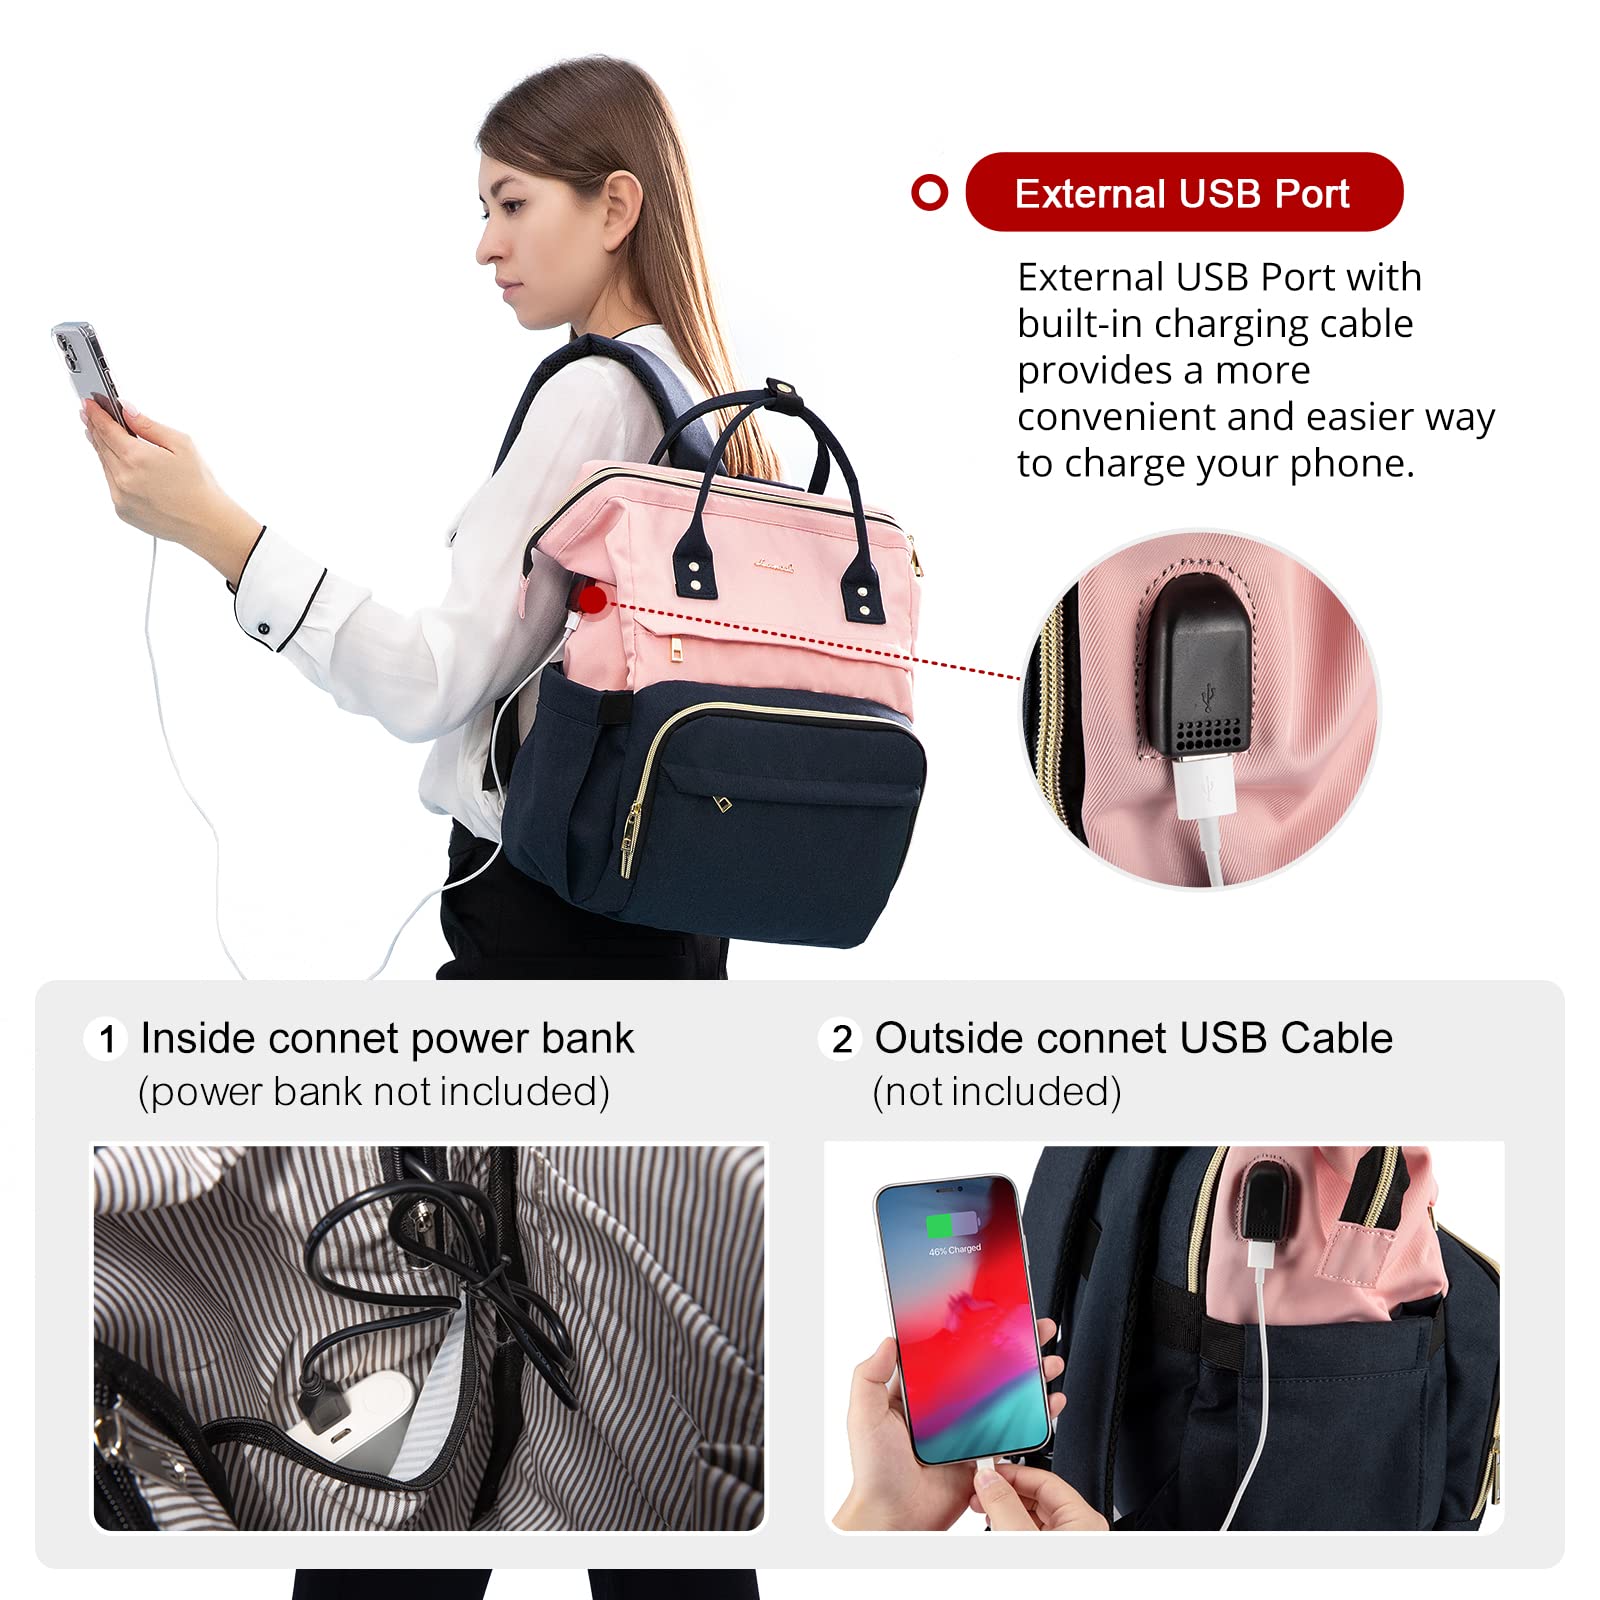 LOVEVOOK Laptop Backpack for Women Fashion Business Computer Backpacks Travel Bags Purse Doctor Nurse Work Backpack with USB Port, Fits 17-Inch Laptop Pink Navy